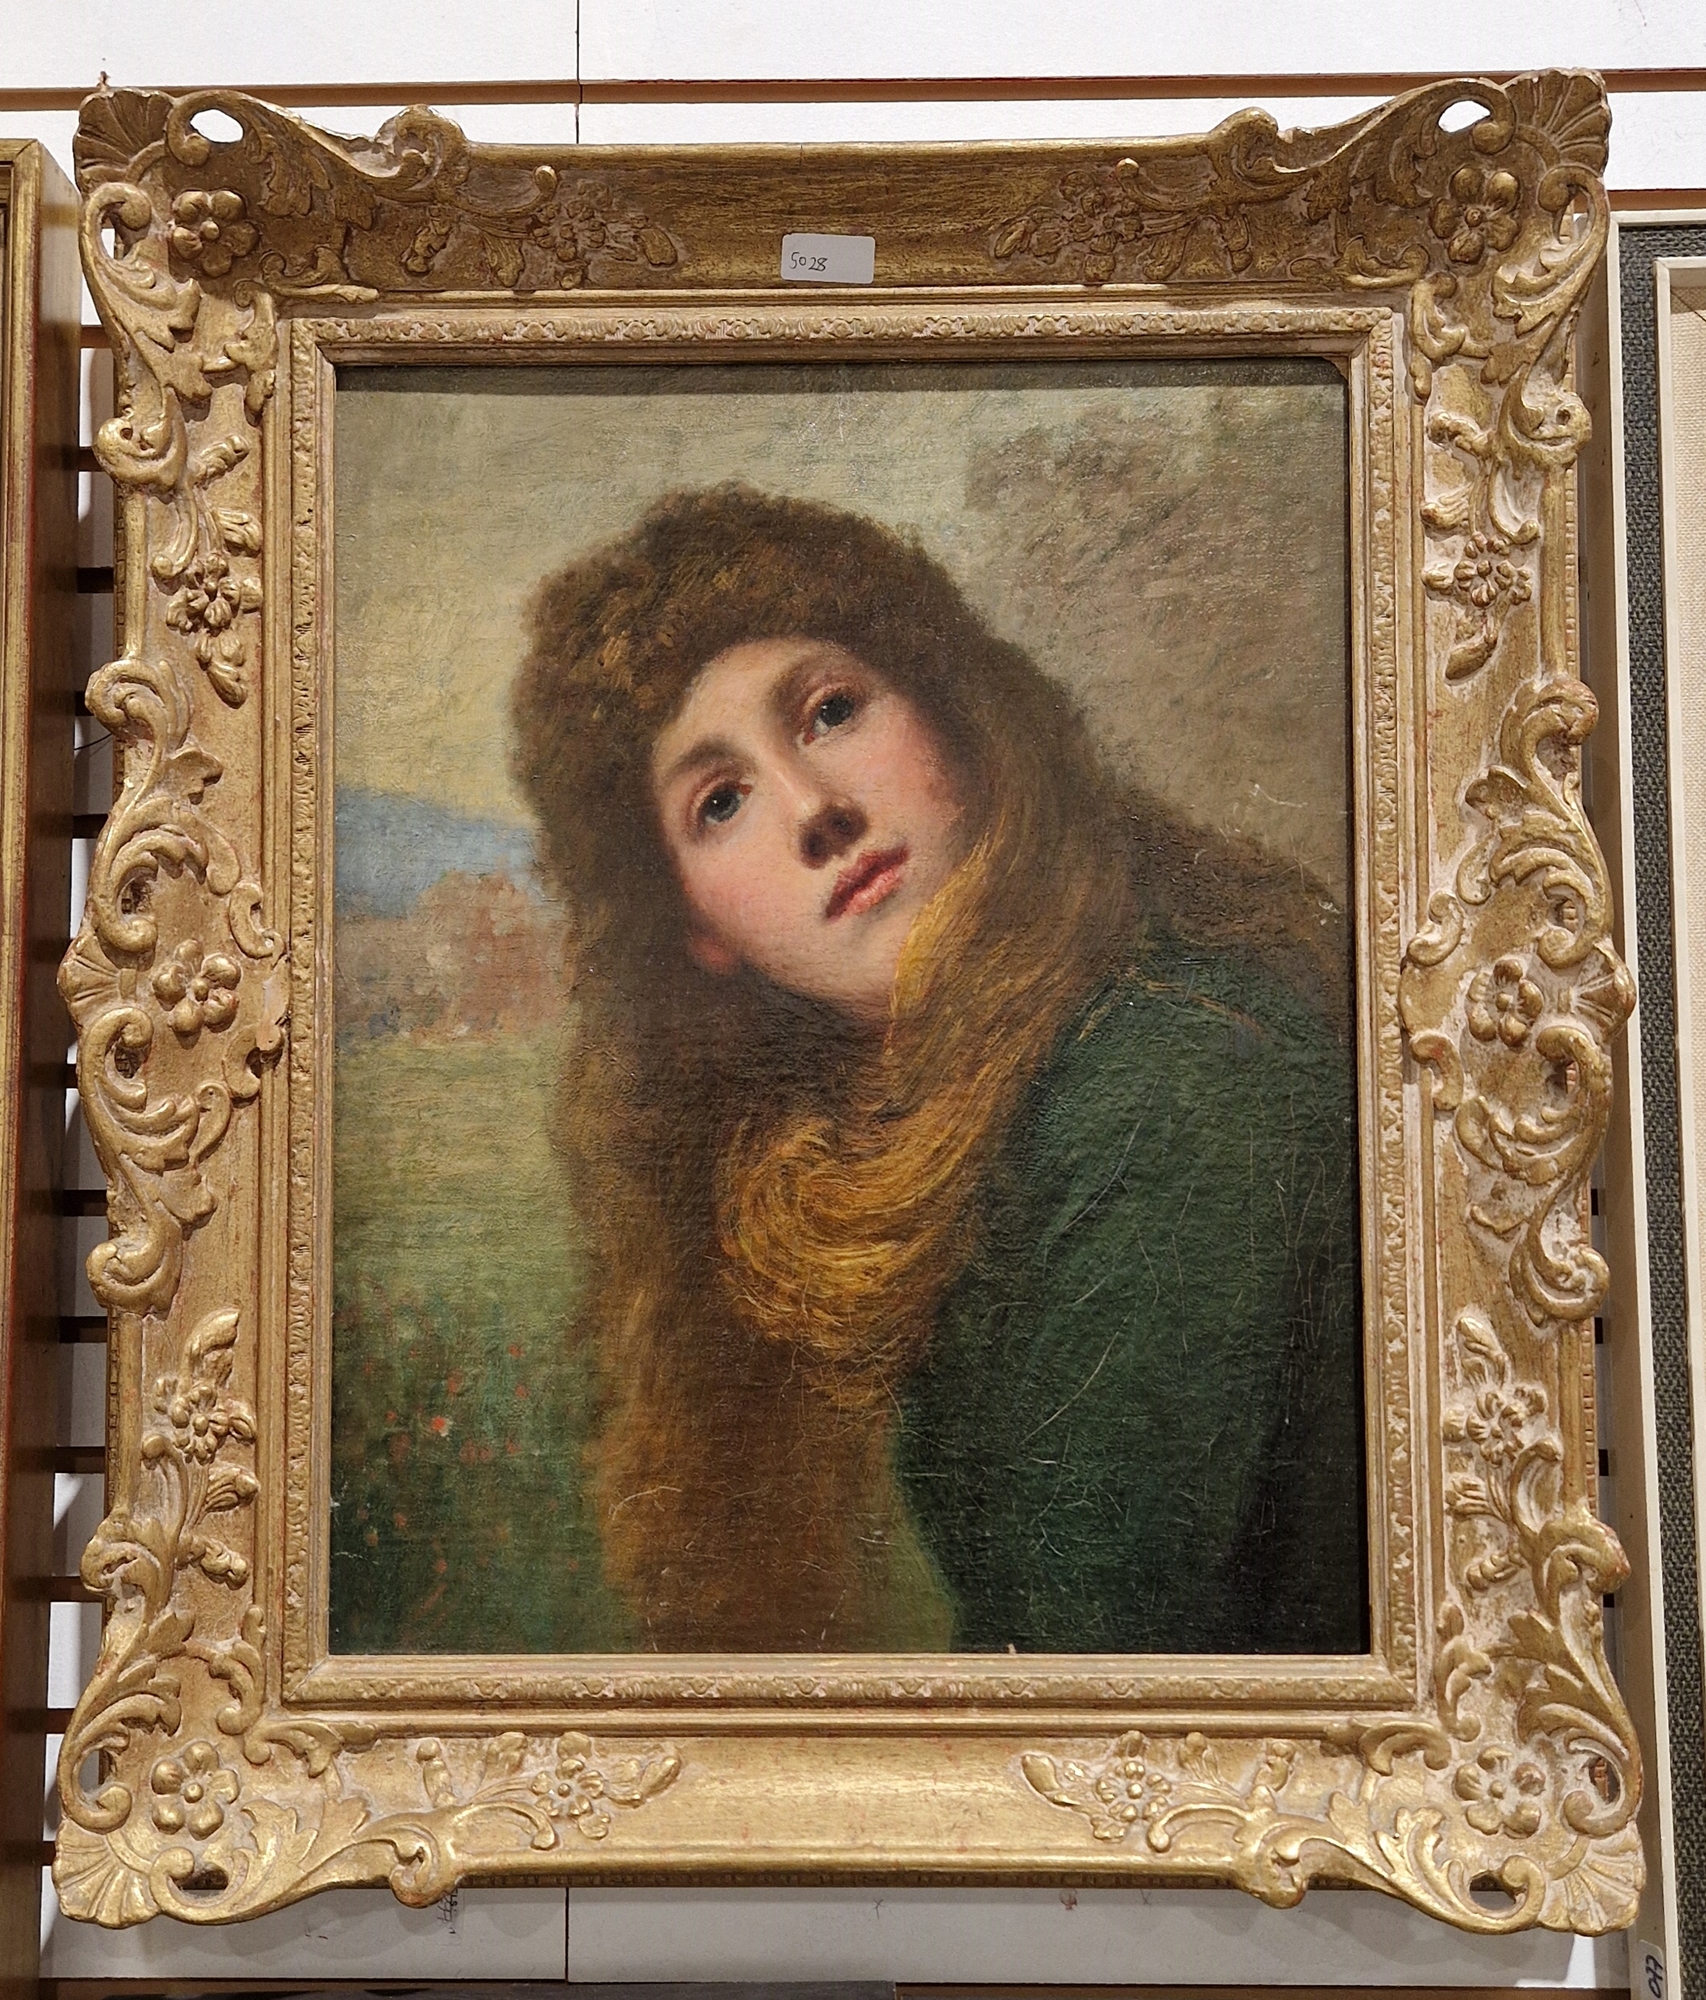 Late 19th century British School Oil on canvas Portrait of a young woman with windswept red hair - Image 14 of 24